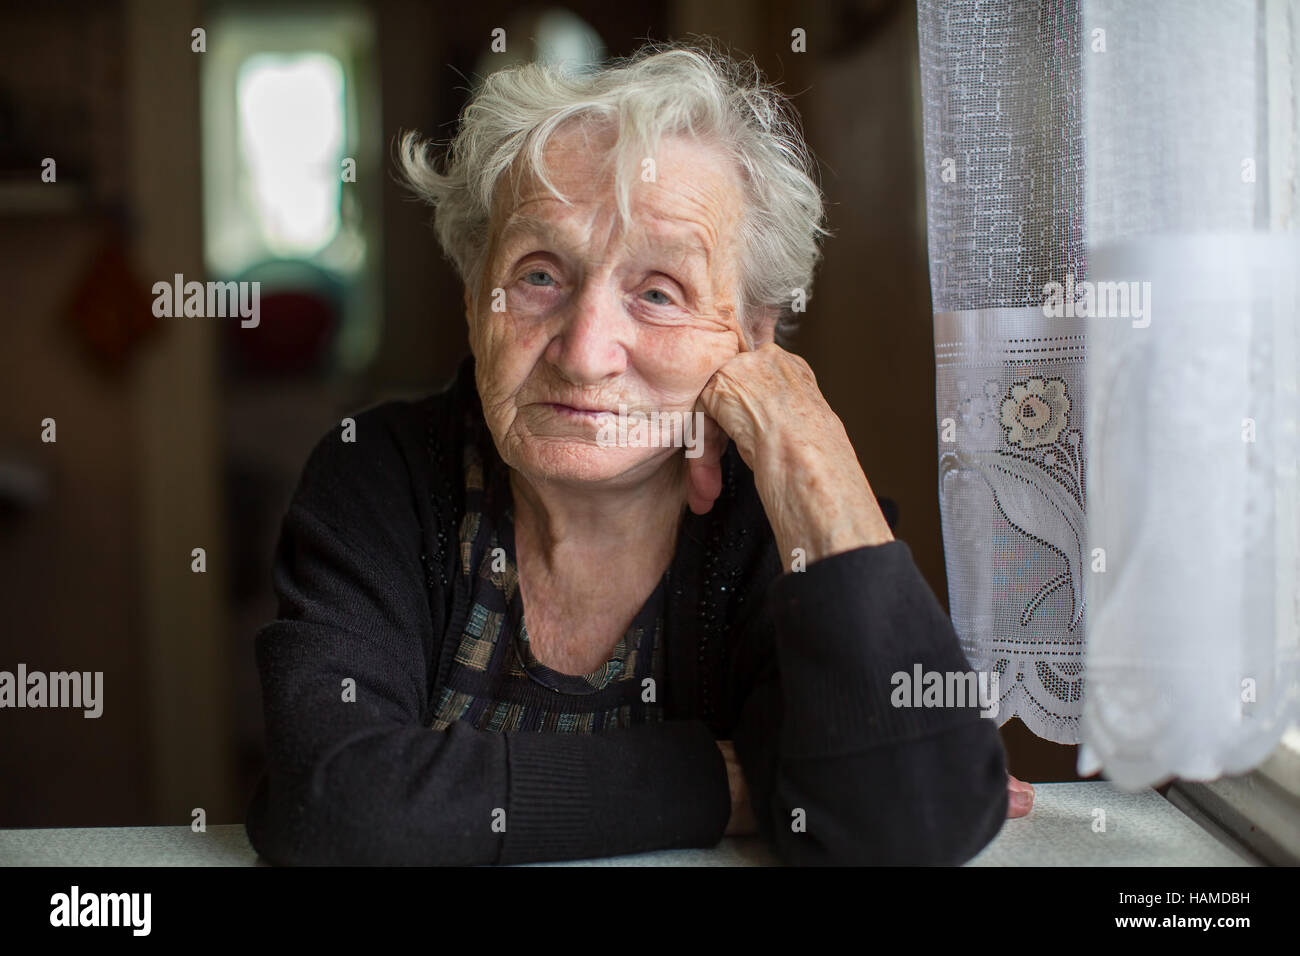 Poor old woman in her home, looking into the camera. Stock Photo